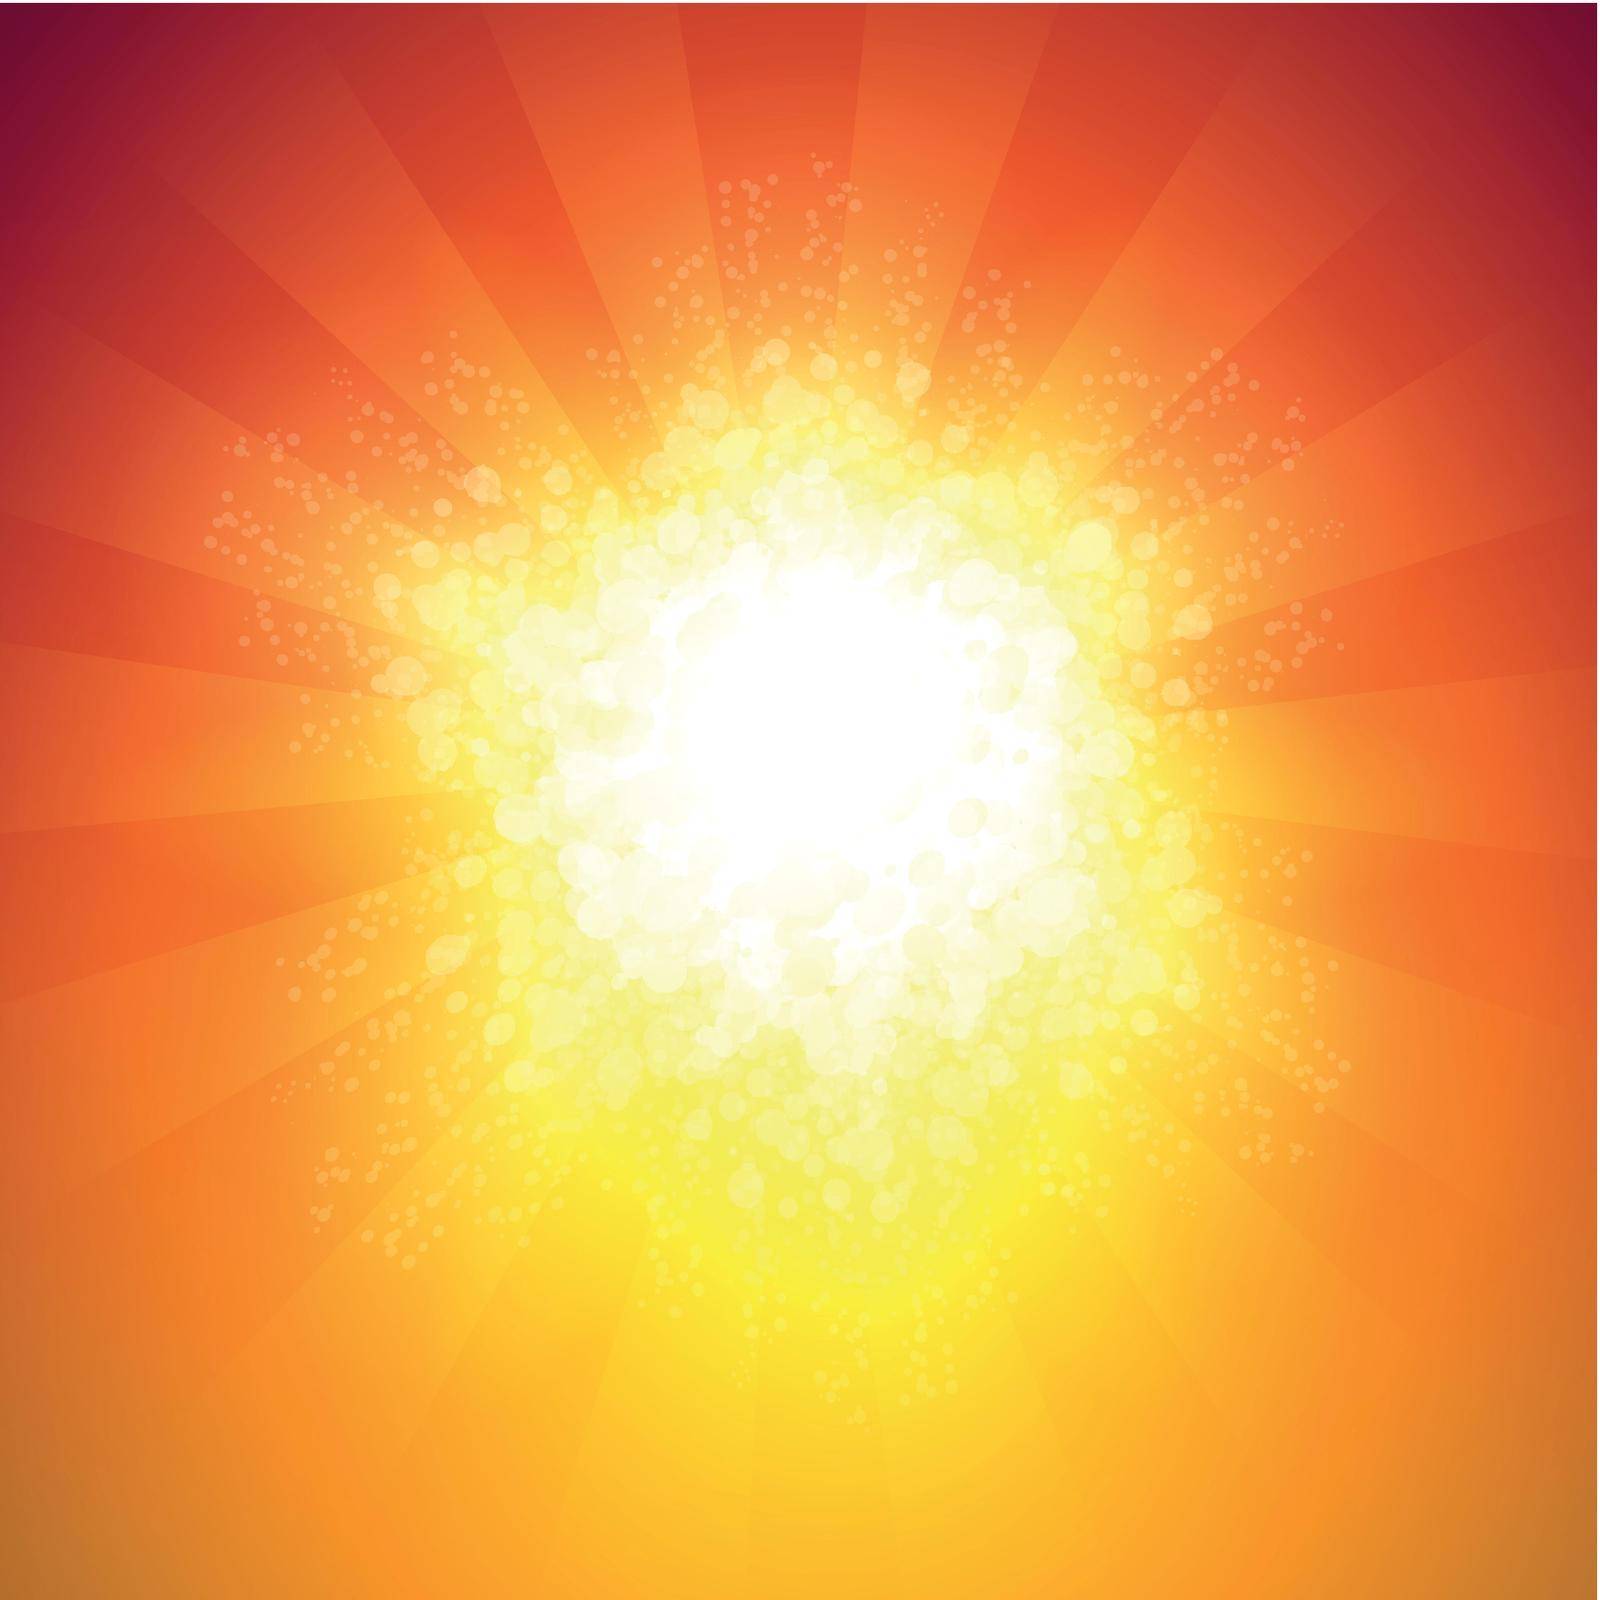 Background with Shiny burst in warm colors with rays of light. Great backdrop with copy space.